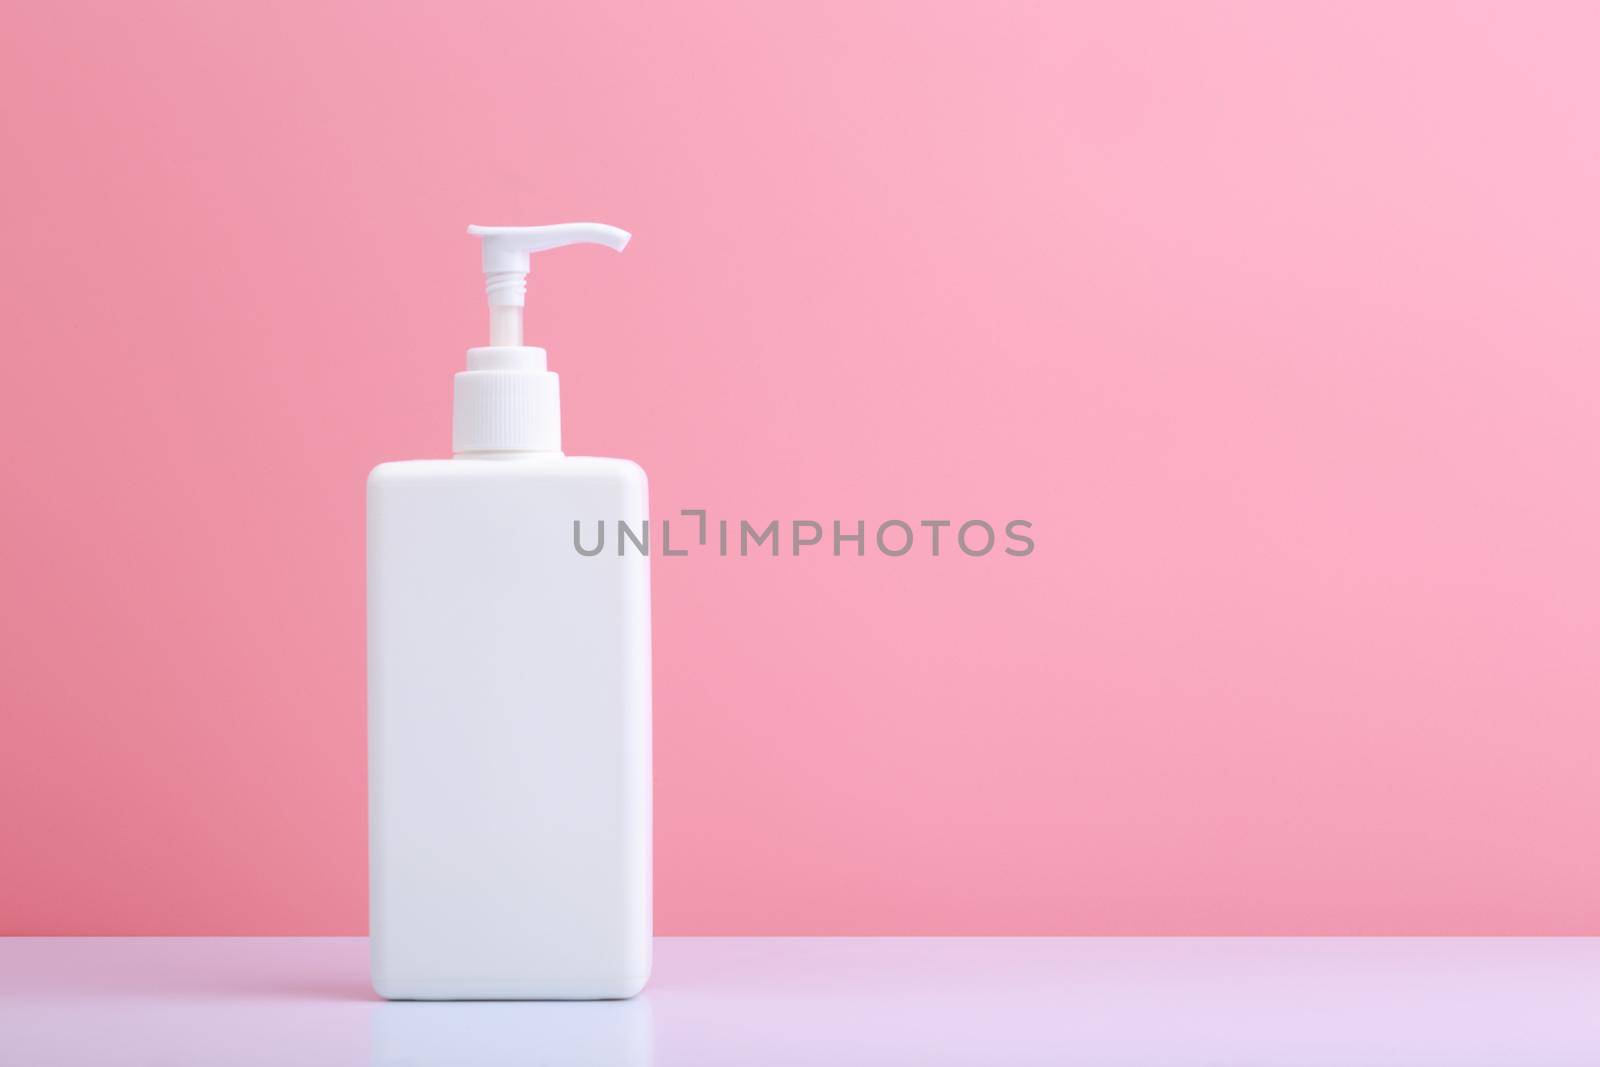 Body cream in tall white tube with dispenser against pink background with copy space by Senorina_Irina